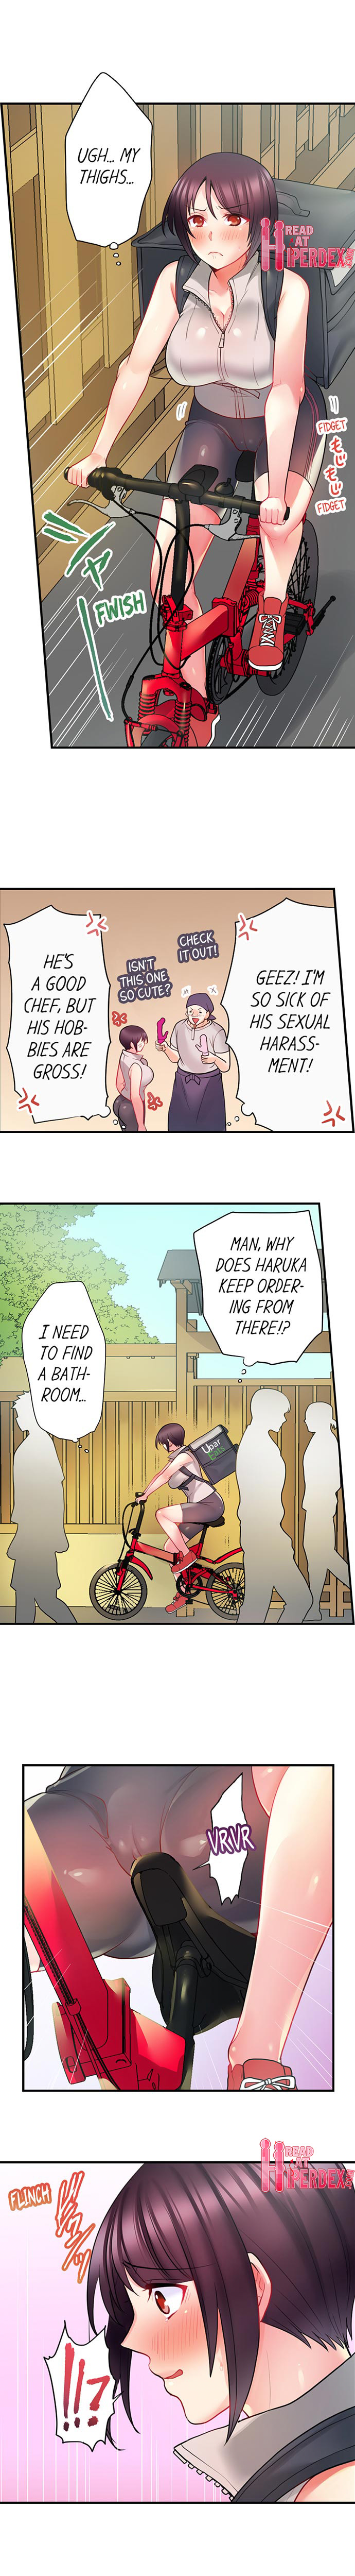 Bike Delivery Girl, Cumming To Your Door! - Chapter 1 Page 6